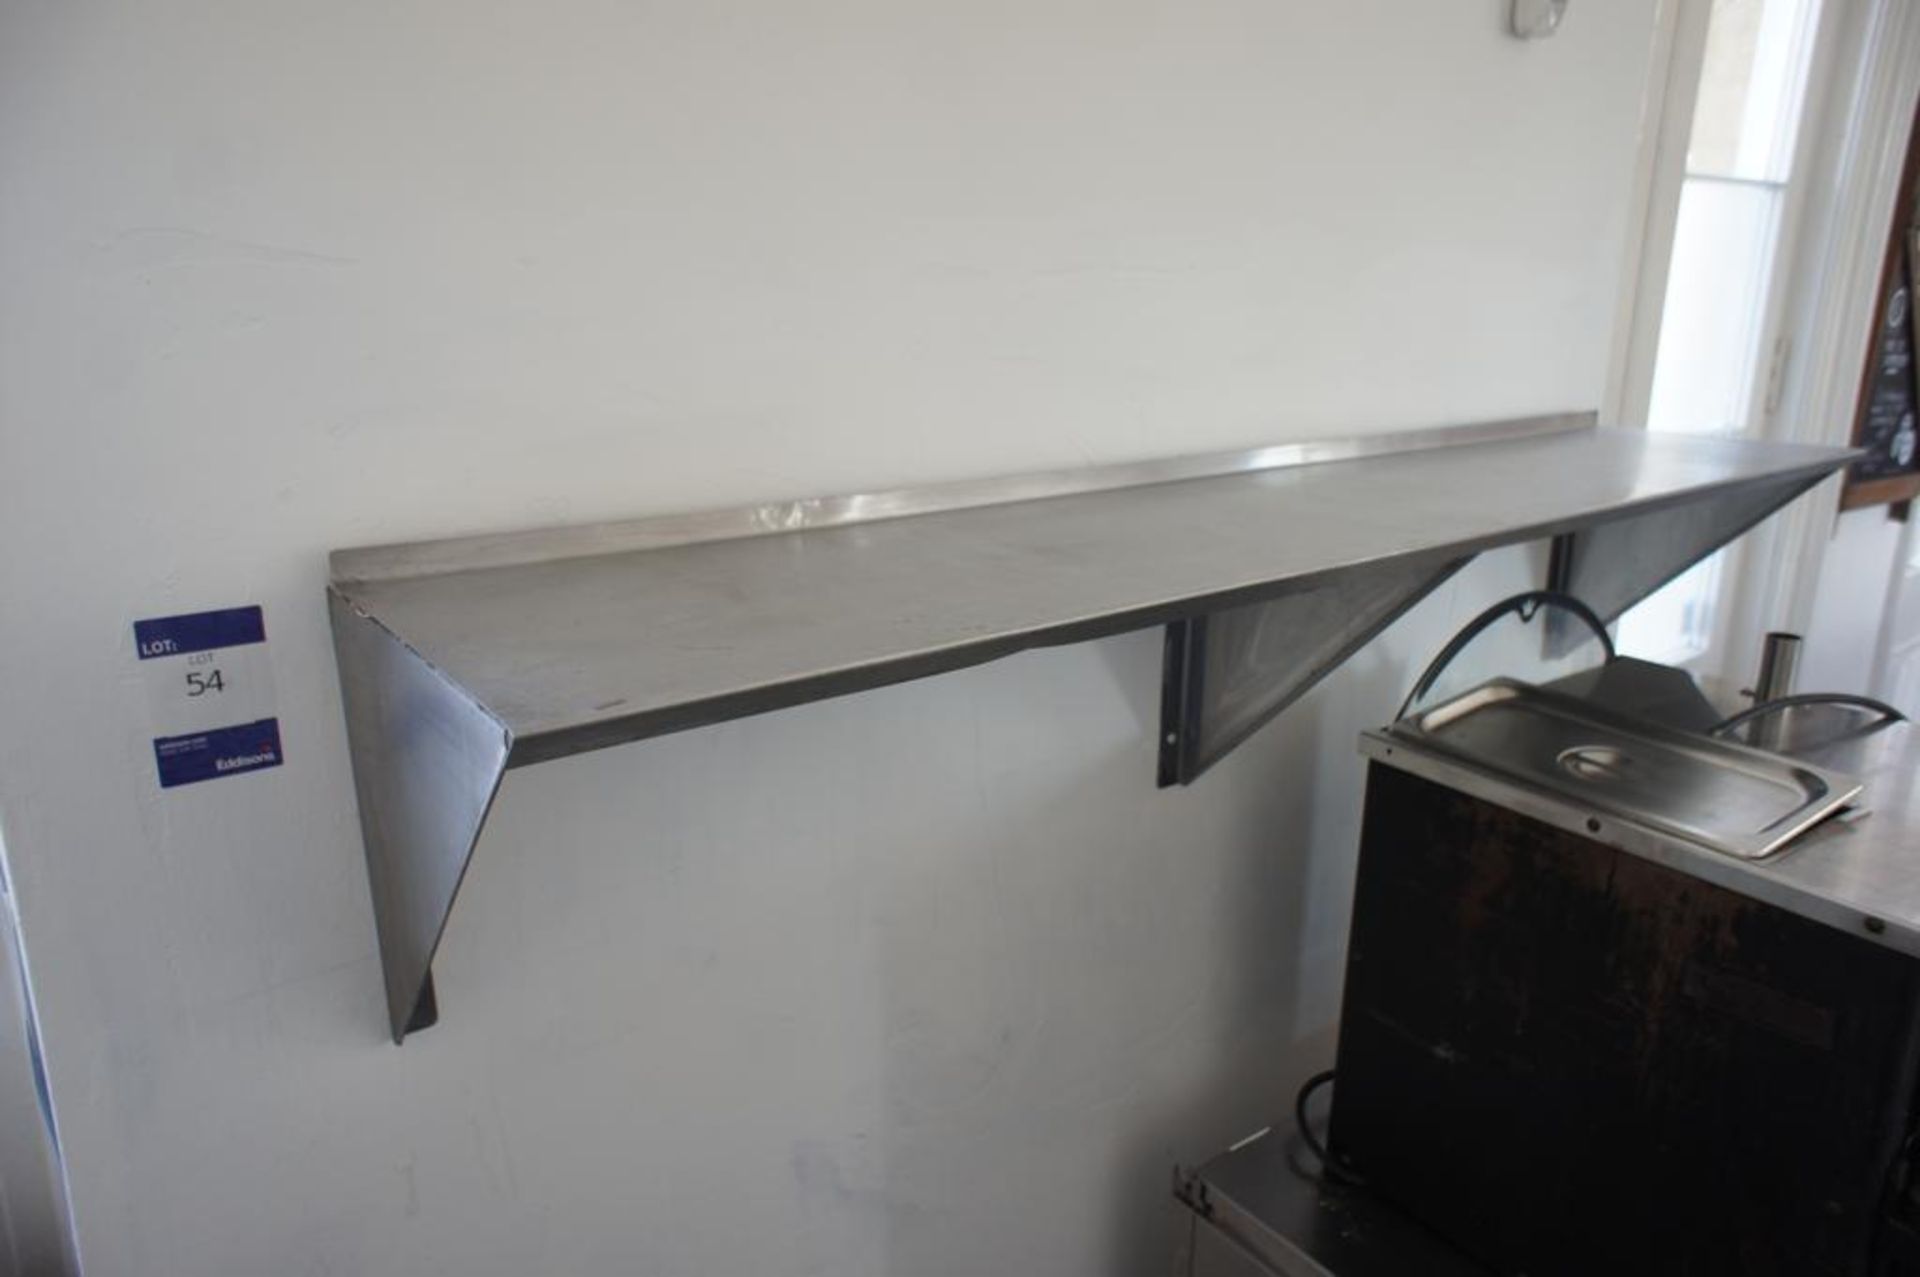 Stainless Steel Shelf 1500 x 300mm - Image 2 of 2